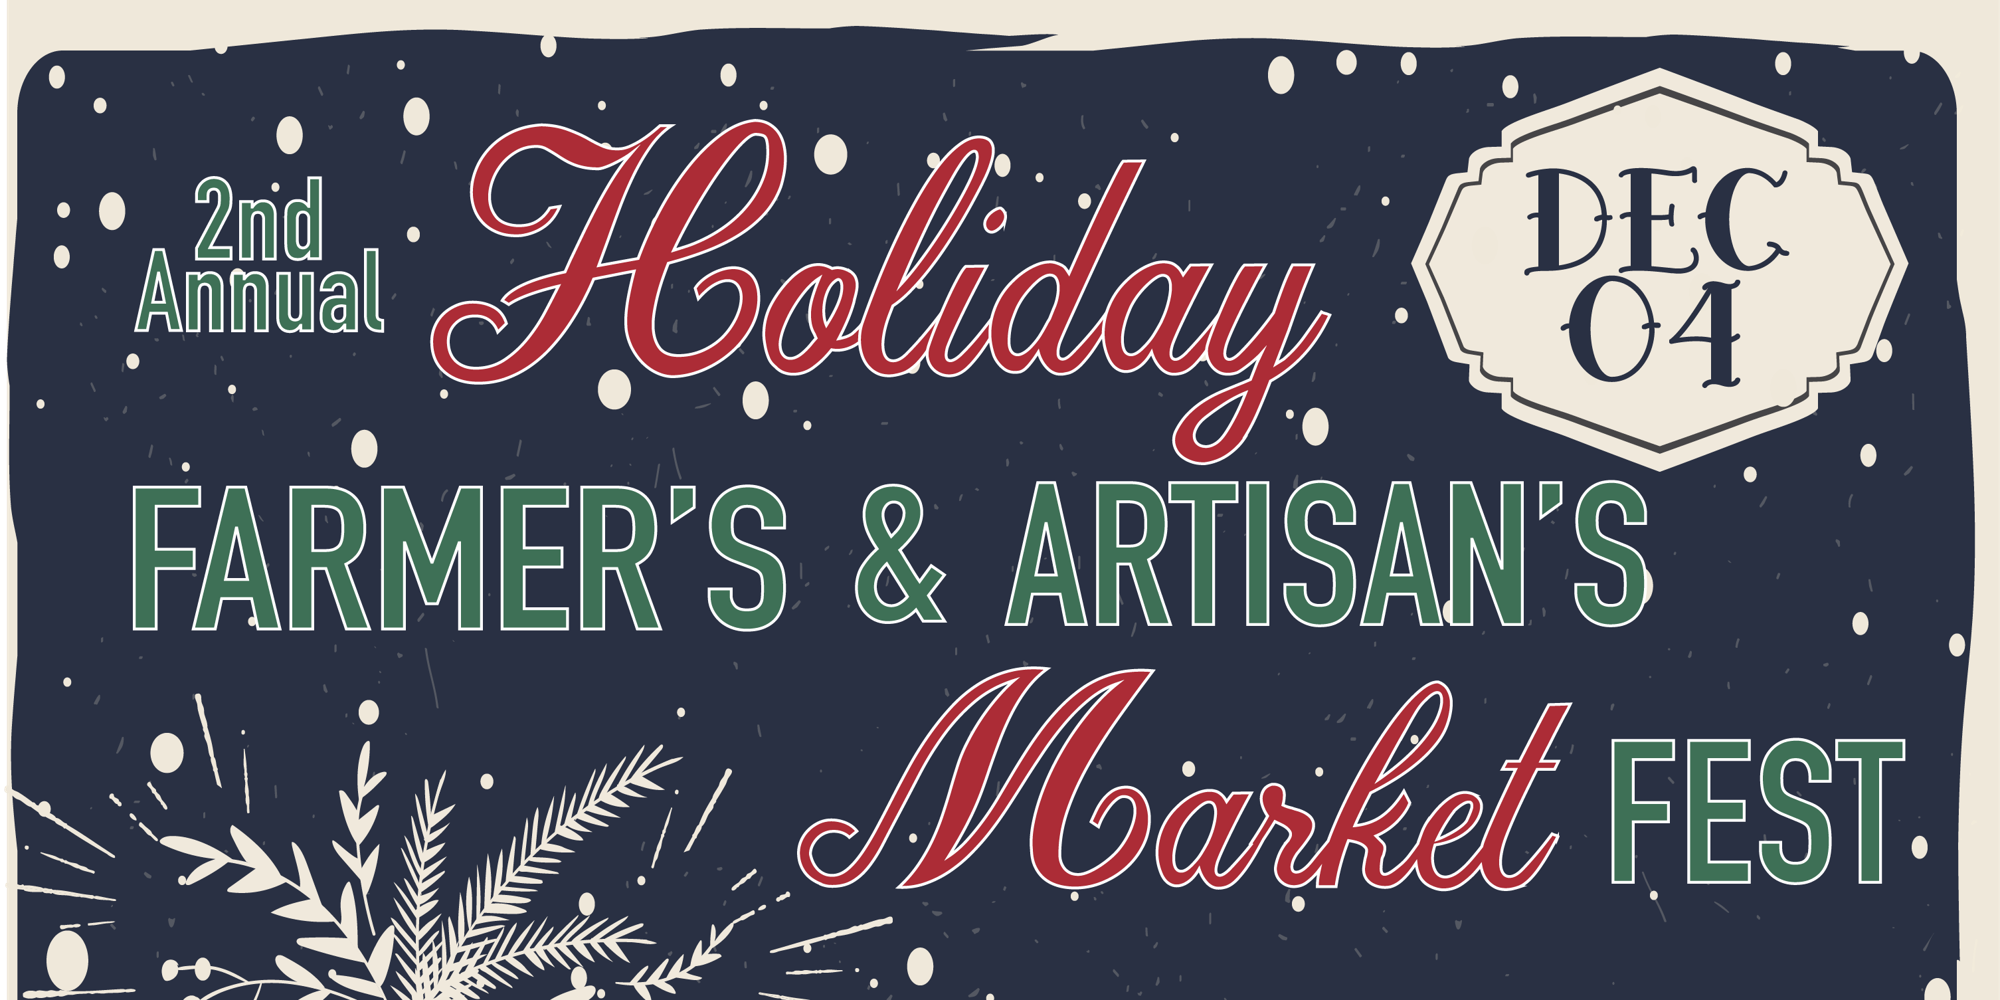 2nd Annual Holiday  Farmers/Artisan Market Fest promotional image